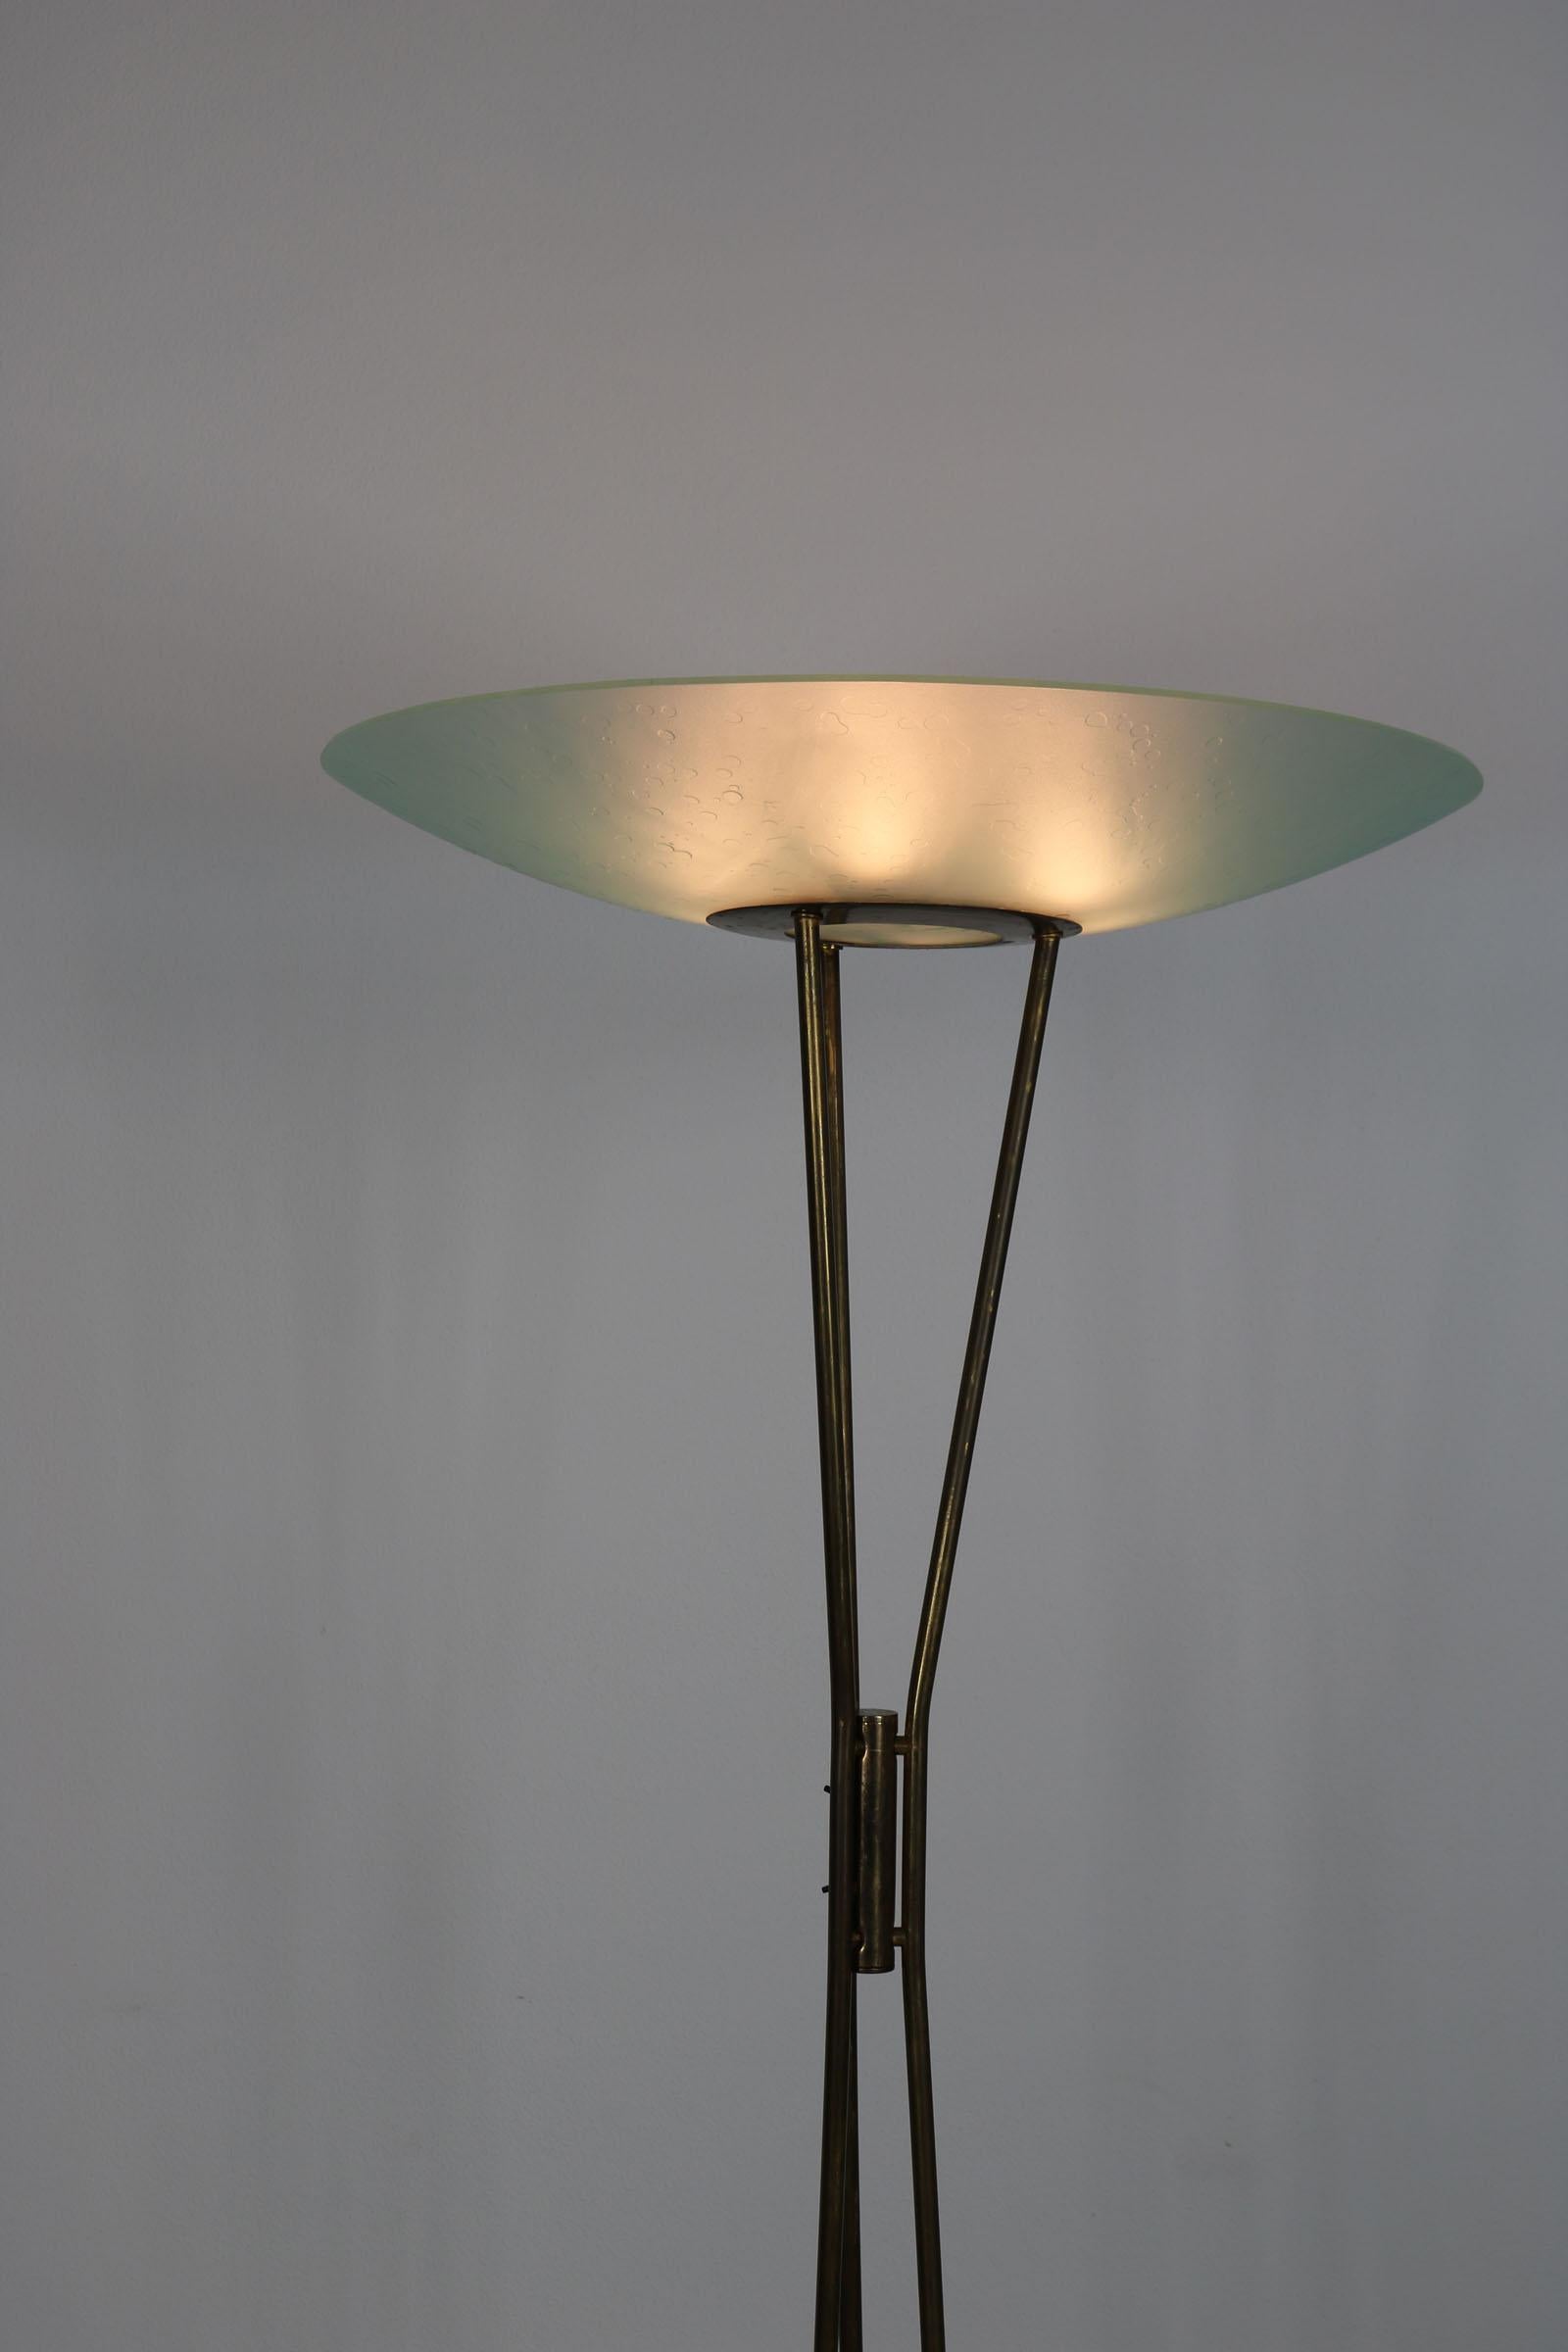 Gateano Scolari Stilnovo Italian Floor Lamp from the 50s In Good Condition For Sale In Wolfurt, AT